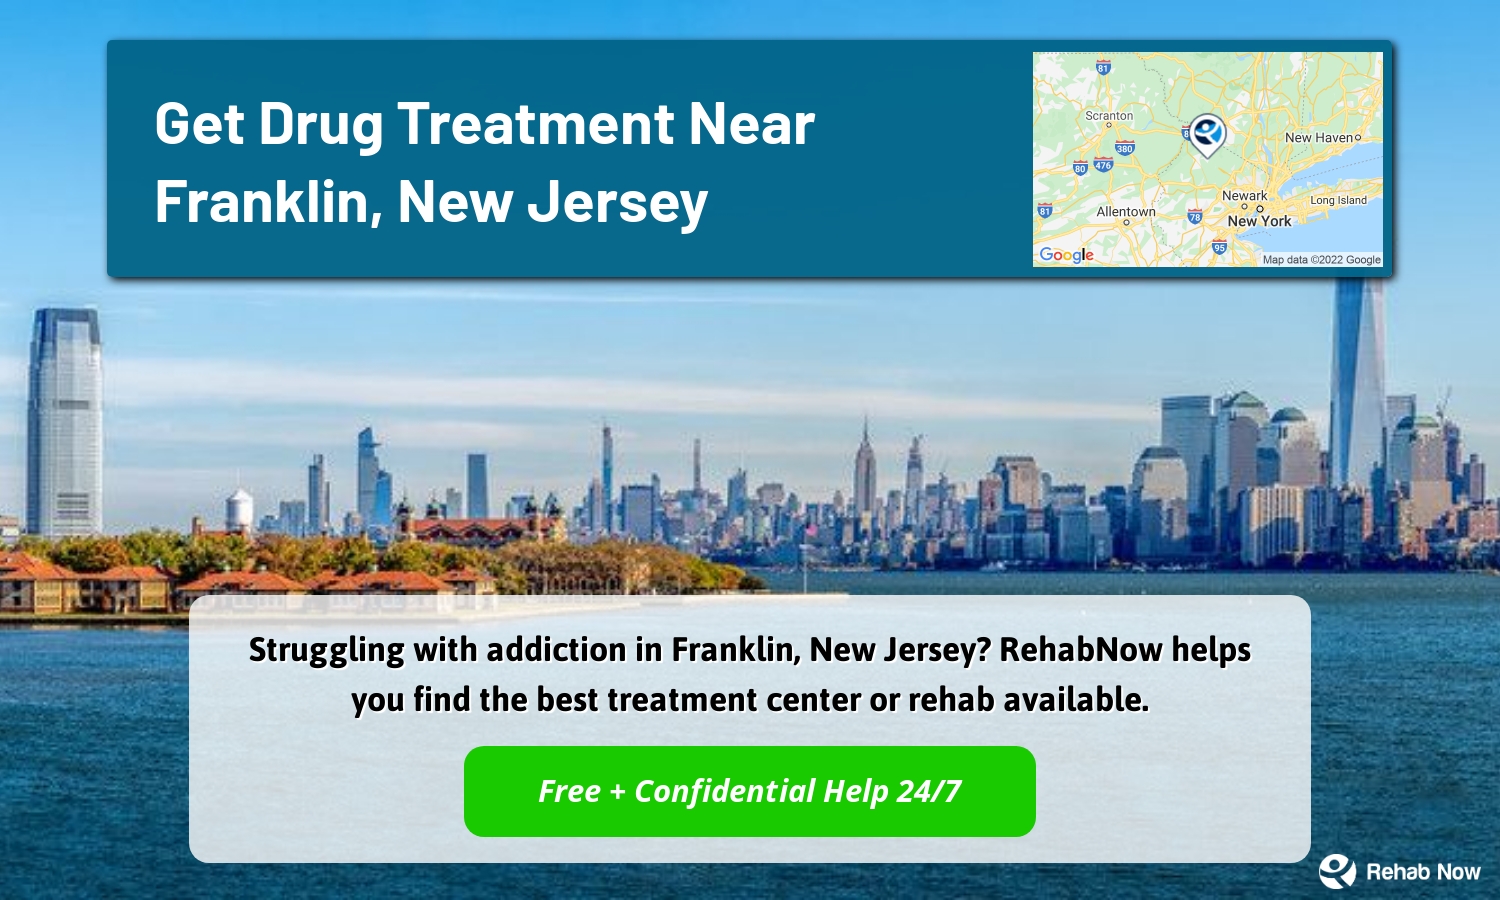 Struggling with addiction in Franklin, New Jersey? RehabNow helps you find the best treatment center or rehab available.